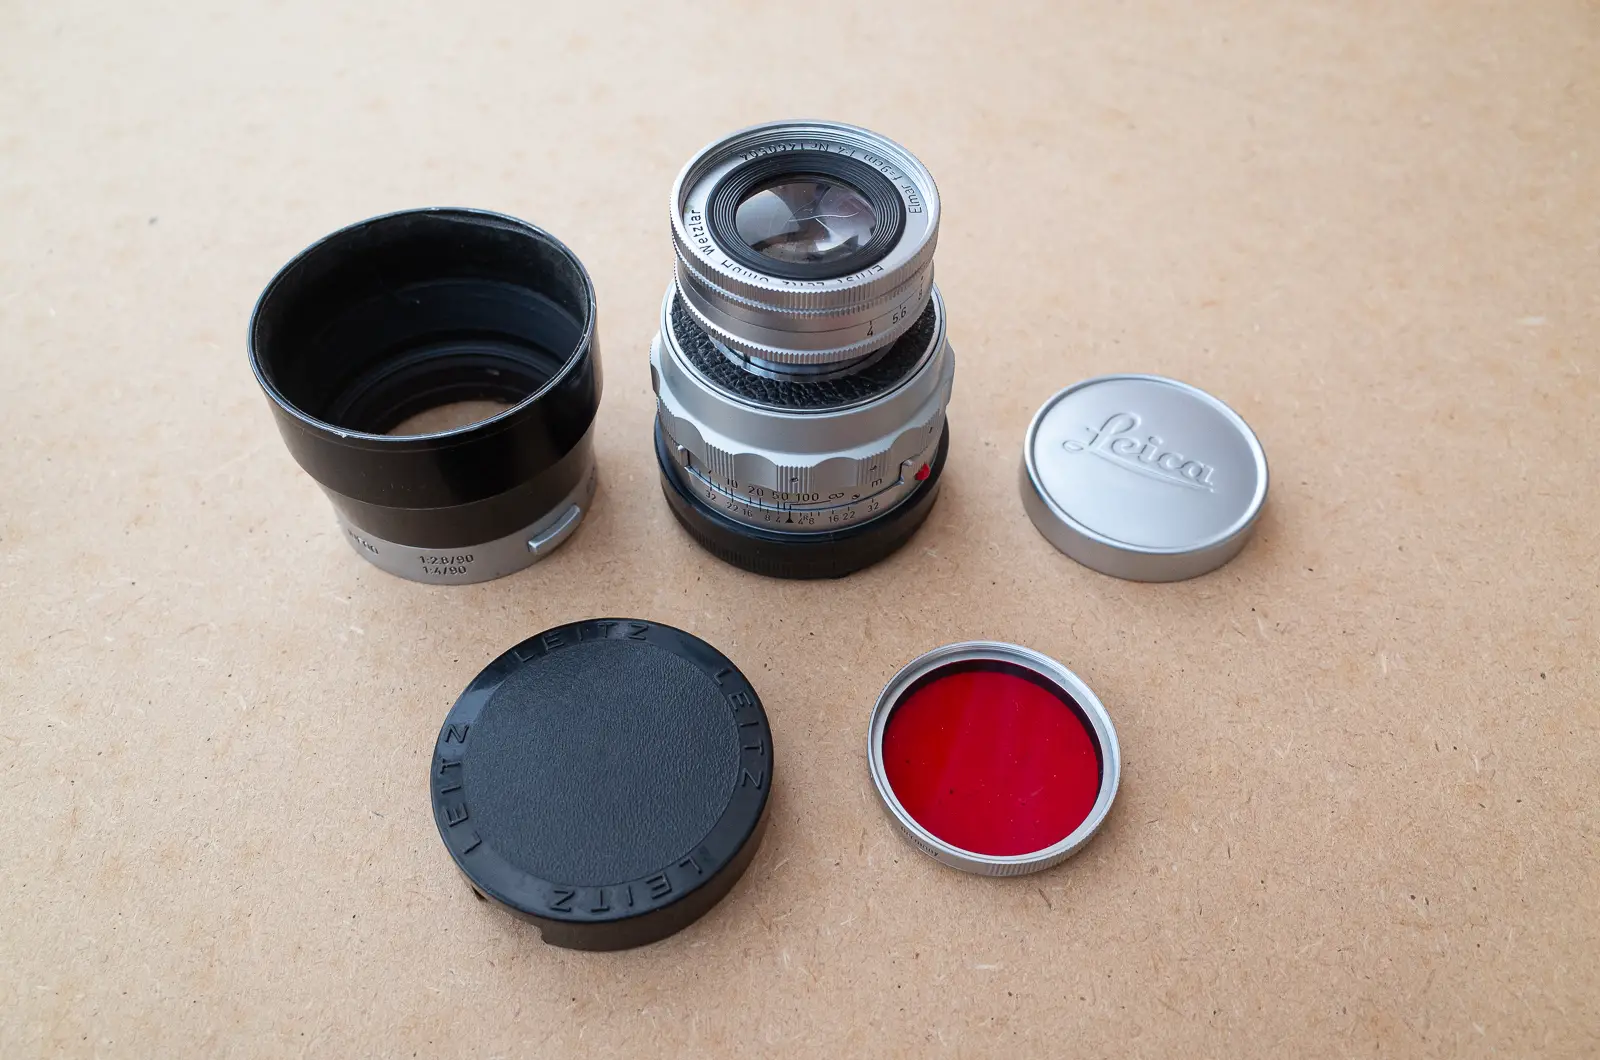 Elmar 9cm f/4 collapsed, IUFOO hood and compatible cap, A39 slip-on cap, and a 39mm R (red) Leitz filter